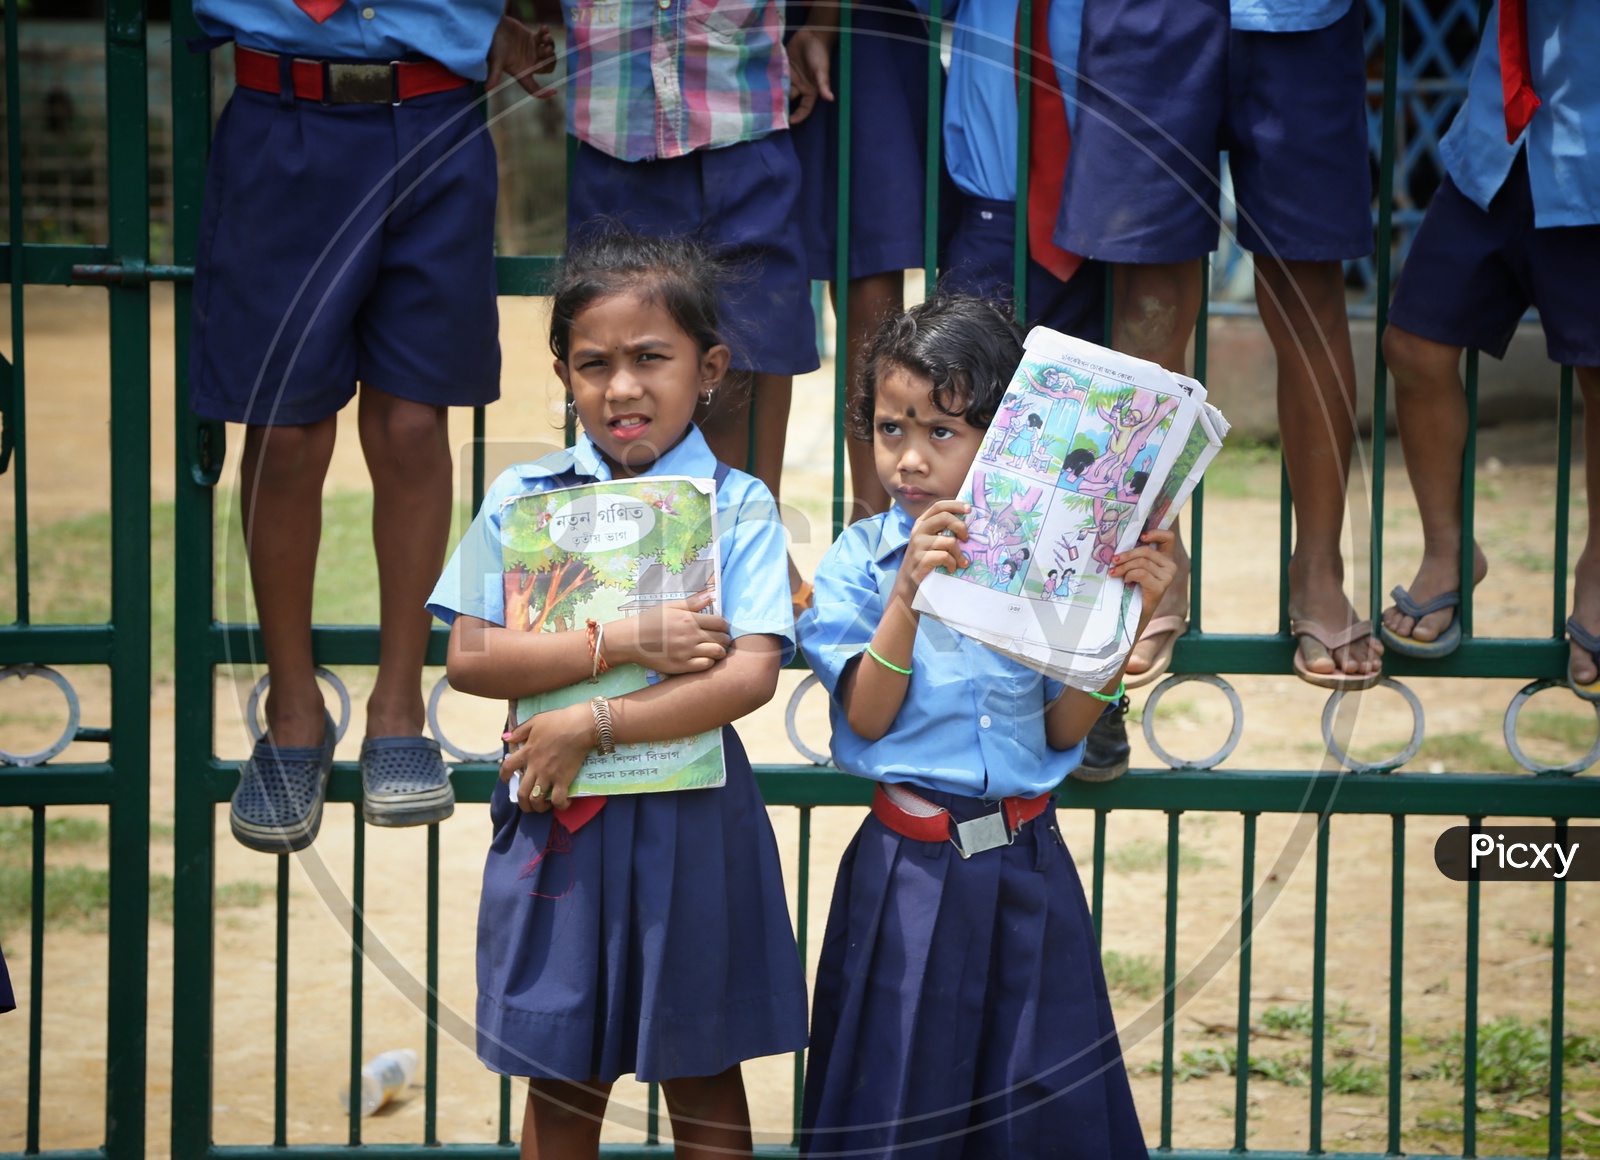 School Girls Wearing Uniform And Holding Books In Hand In a Rural Village School